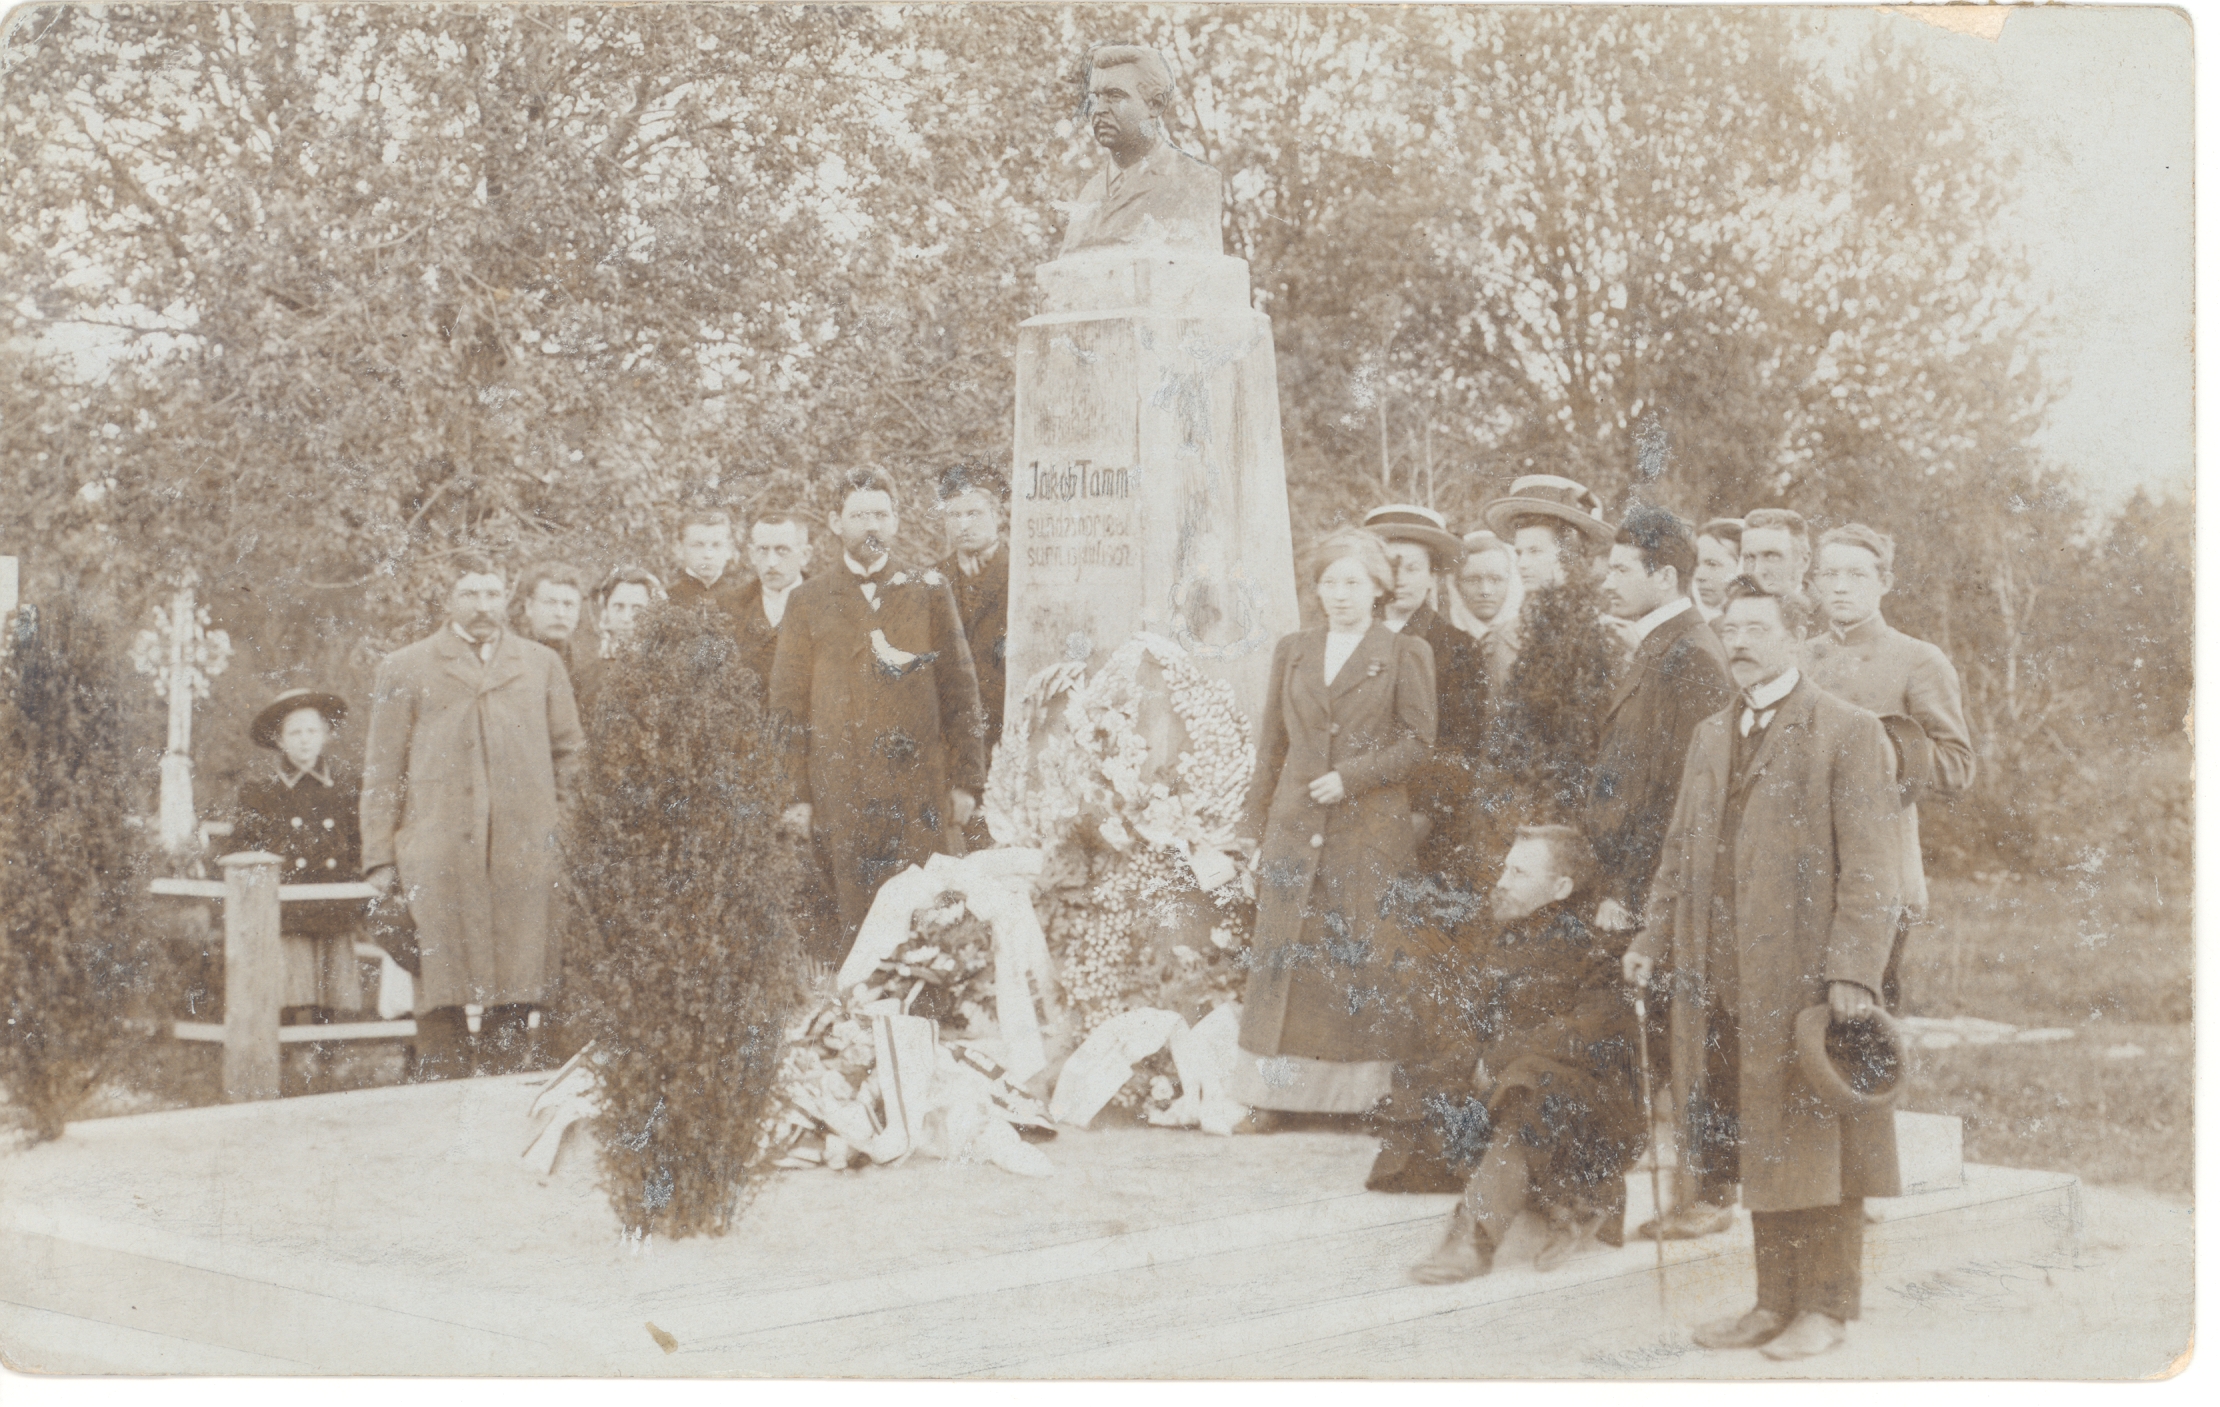 Opening of Jakob Tamme's monument mark on May 24, 1912 at Väike-Maarja cemetery